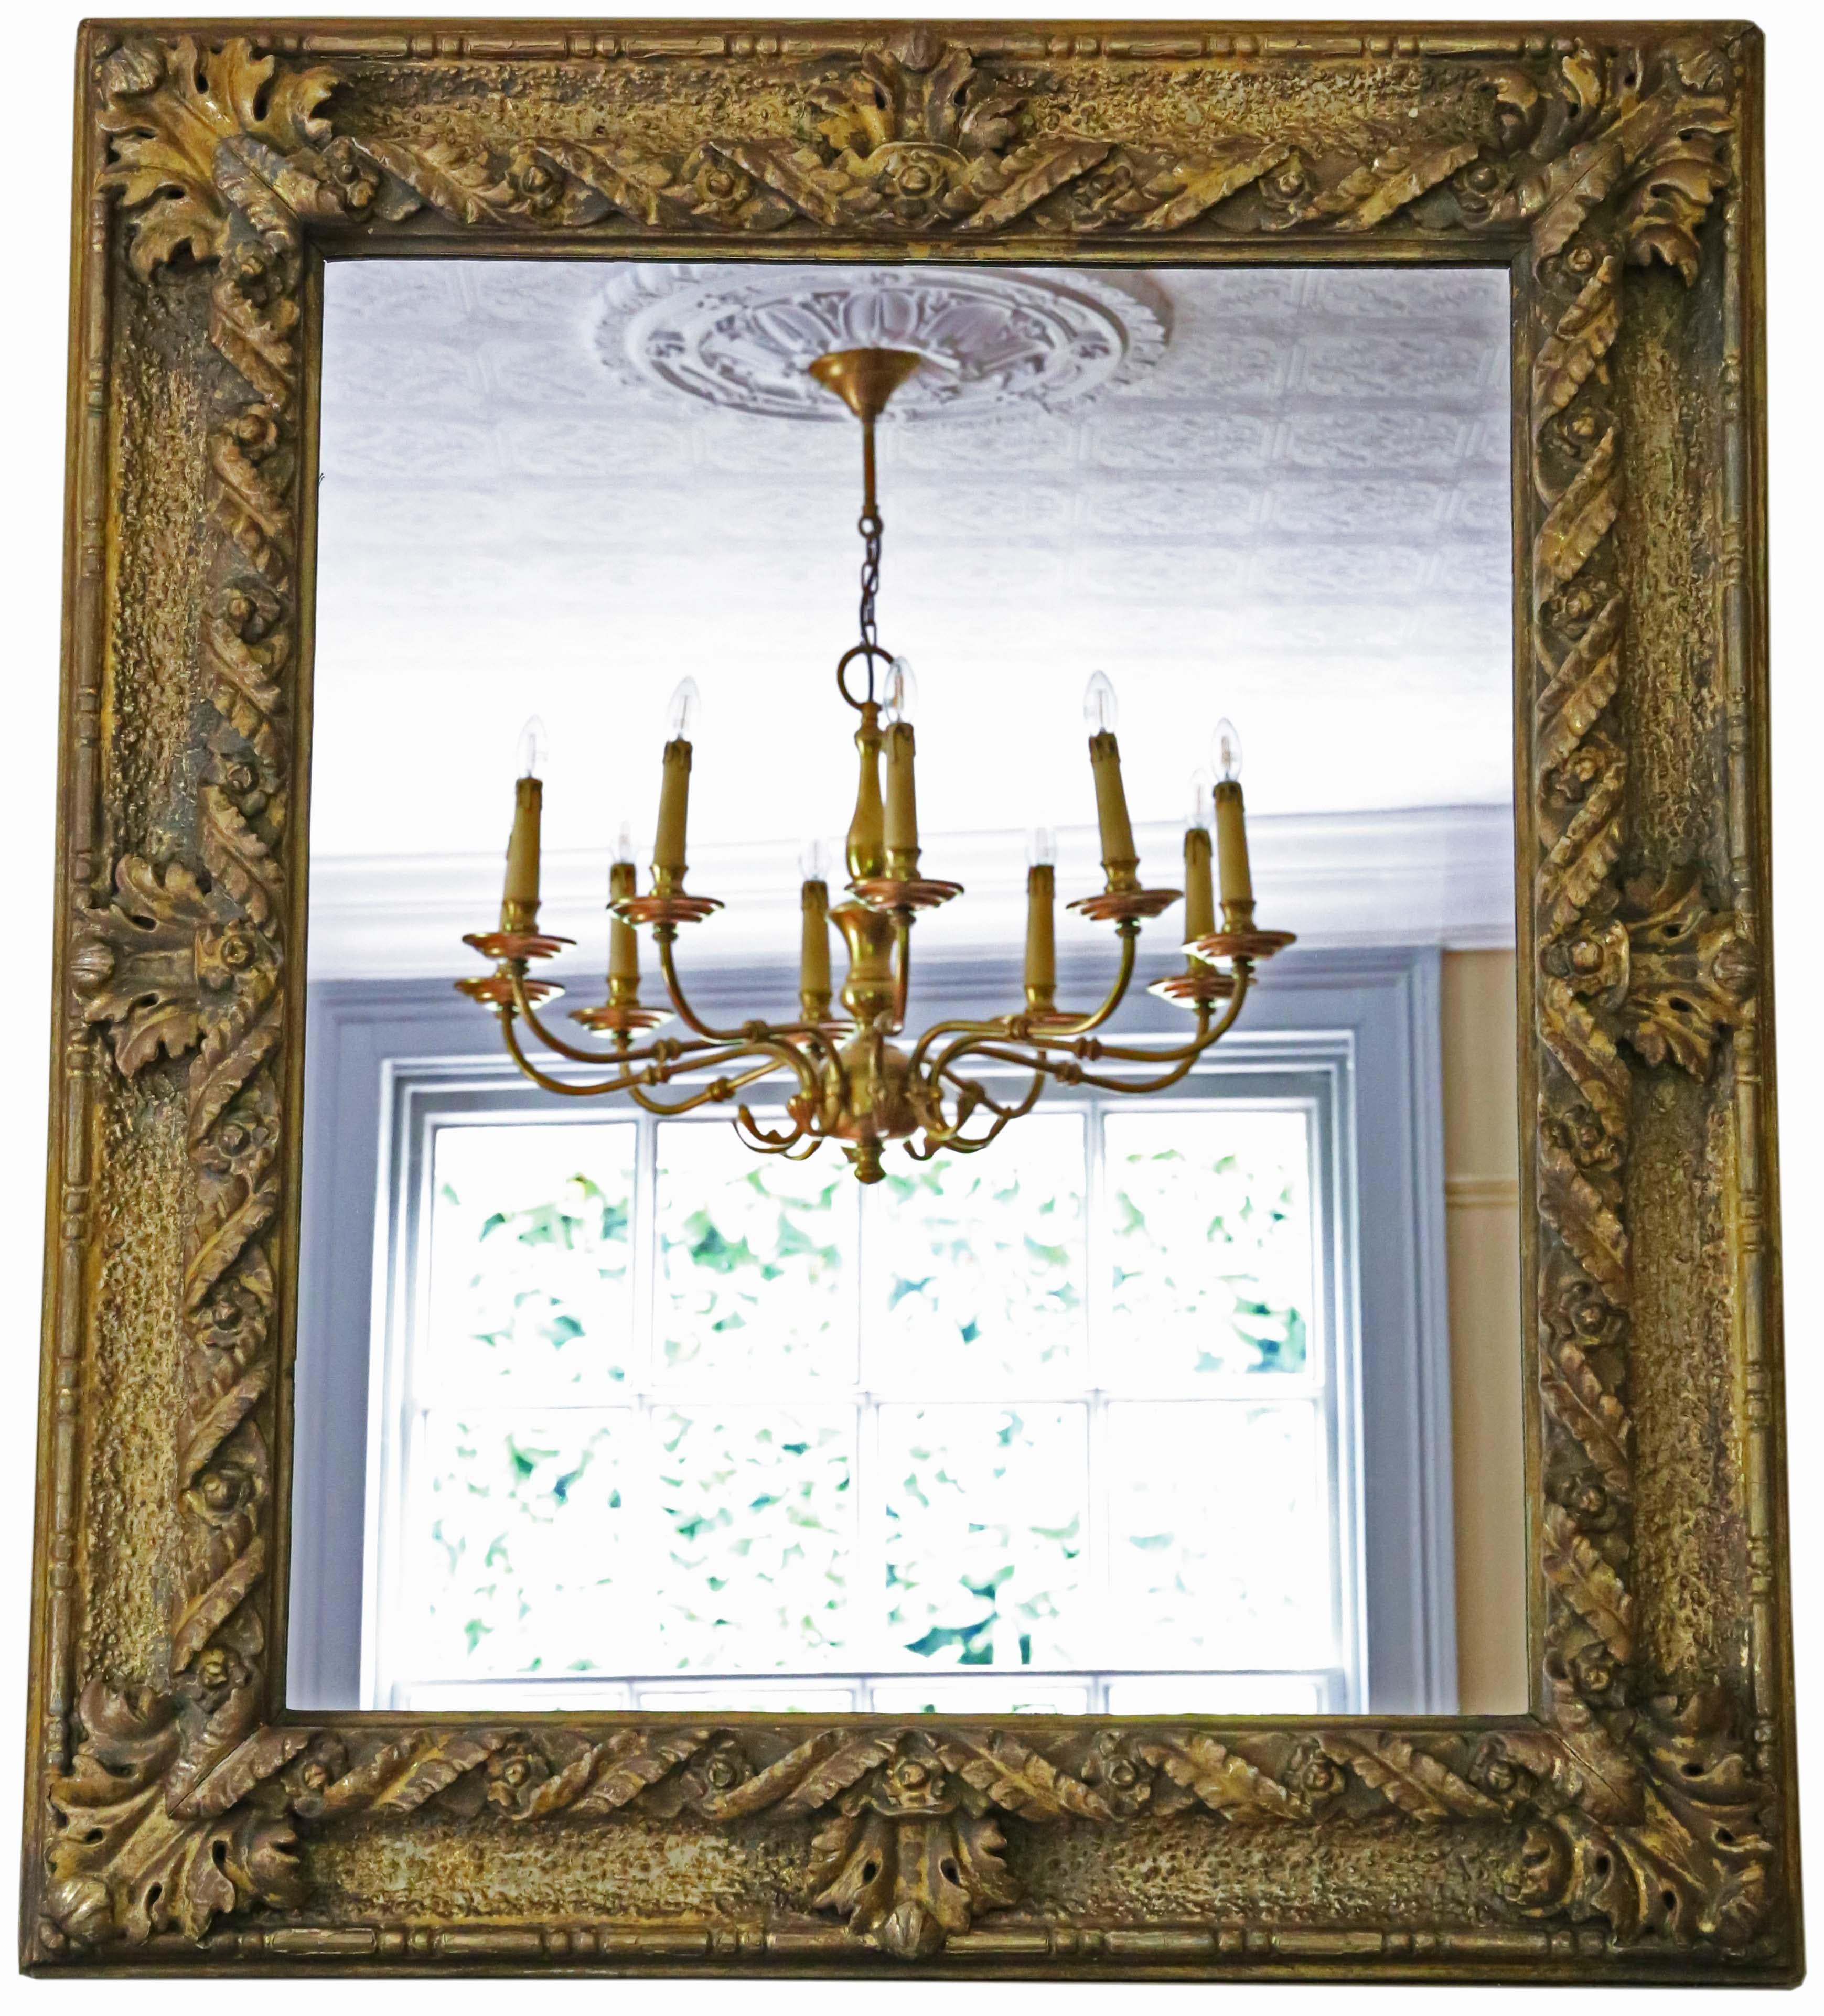 Antique fine quality large giltwood 19th Century overmantle or wall mirror with a lovely charm and elegance.

This is a lovely, rare mirror and a great decorative find.

An impressive and rare find, that would look amazing in the right location. No